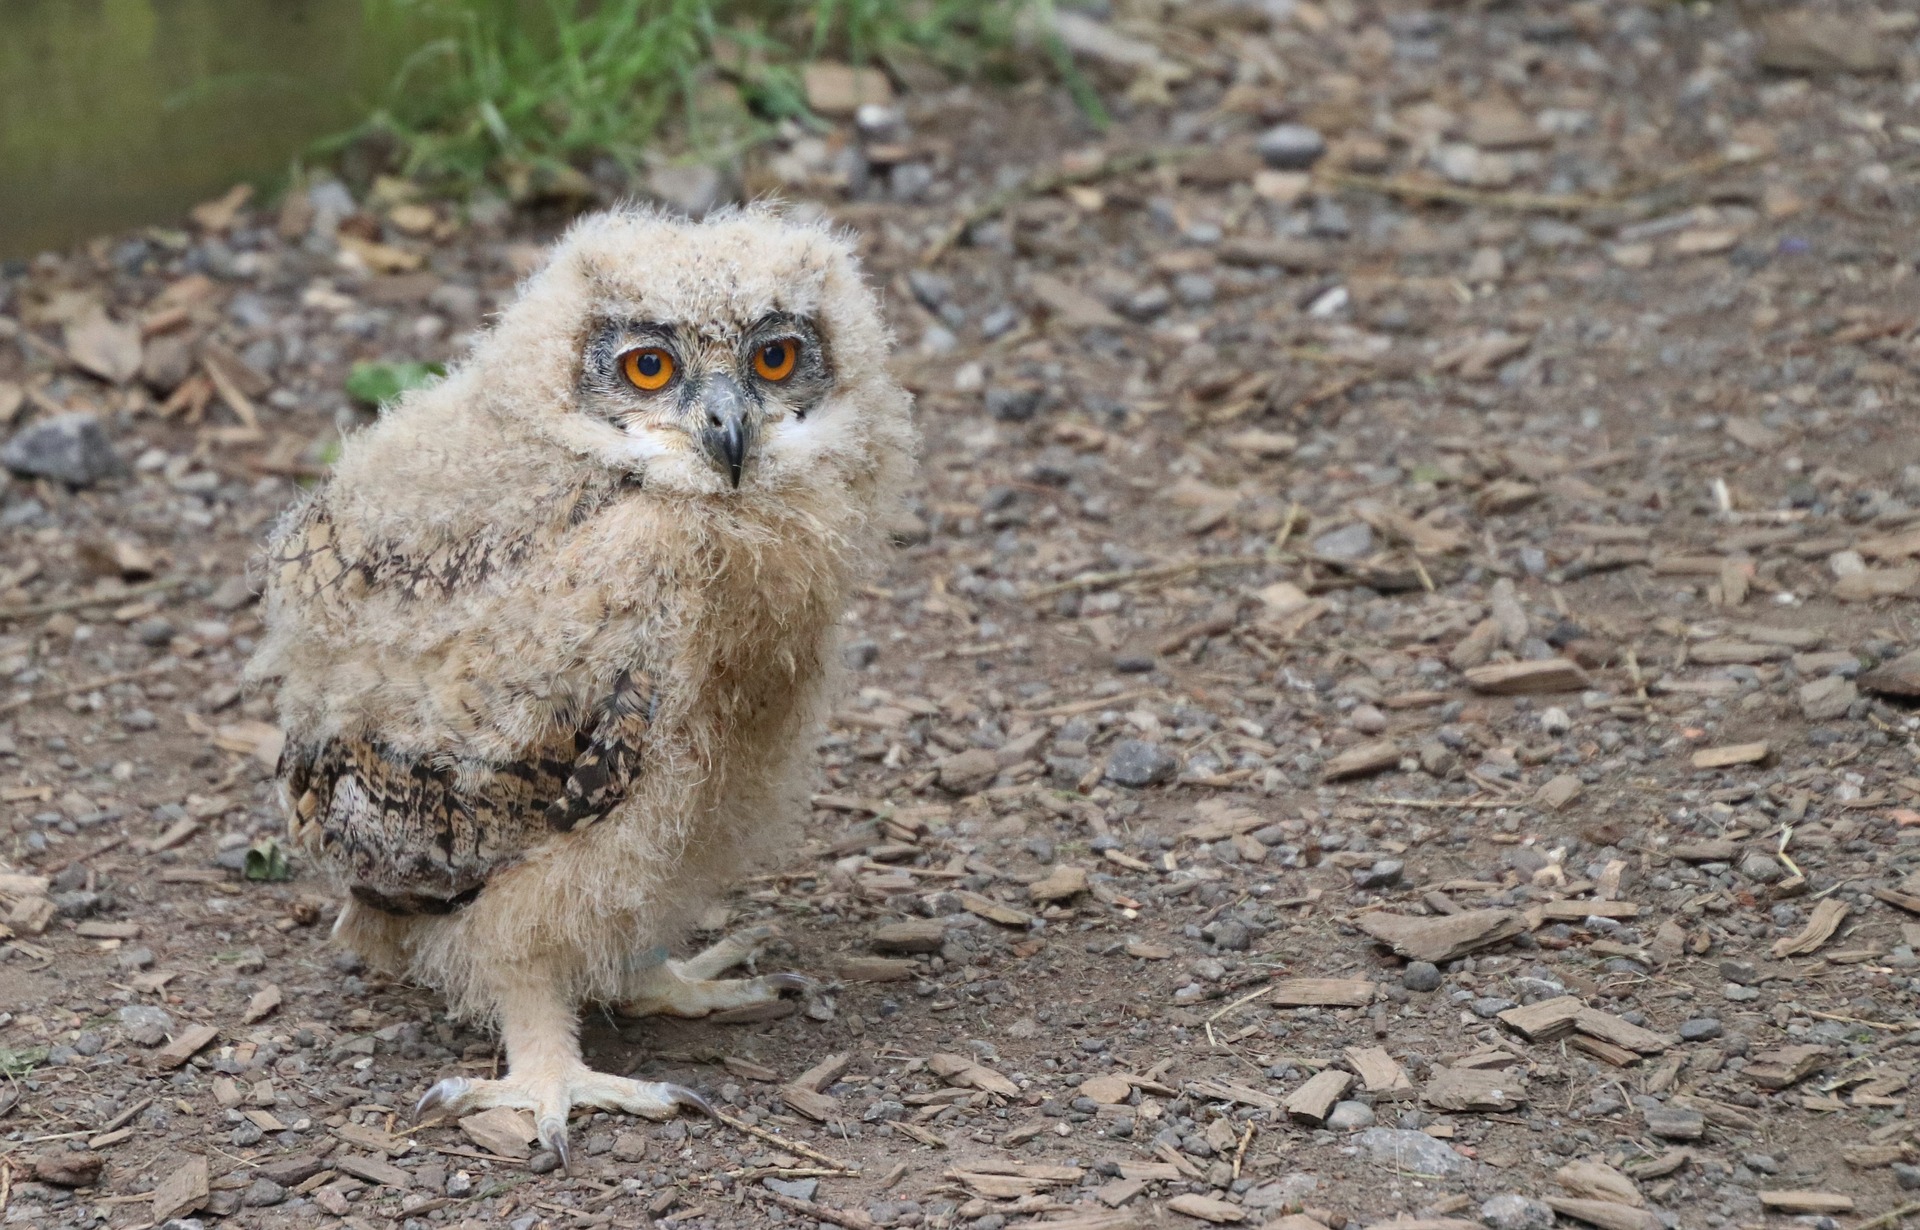 a baby owl on a dirt path